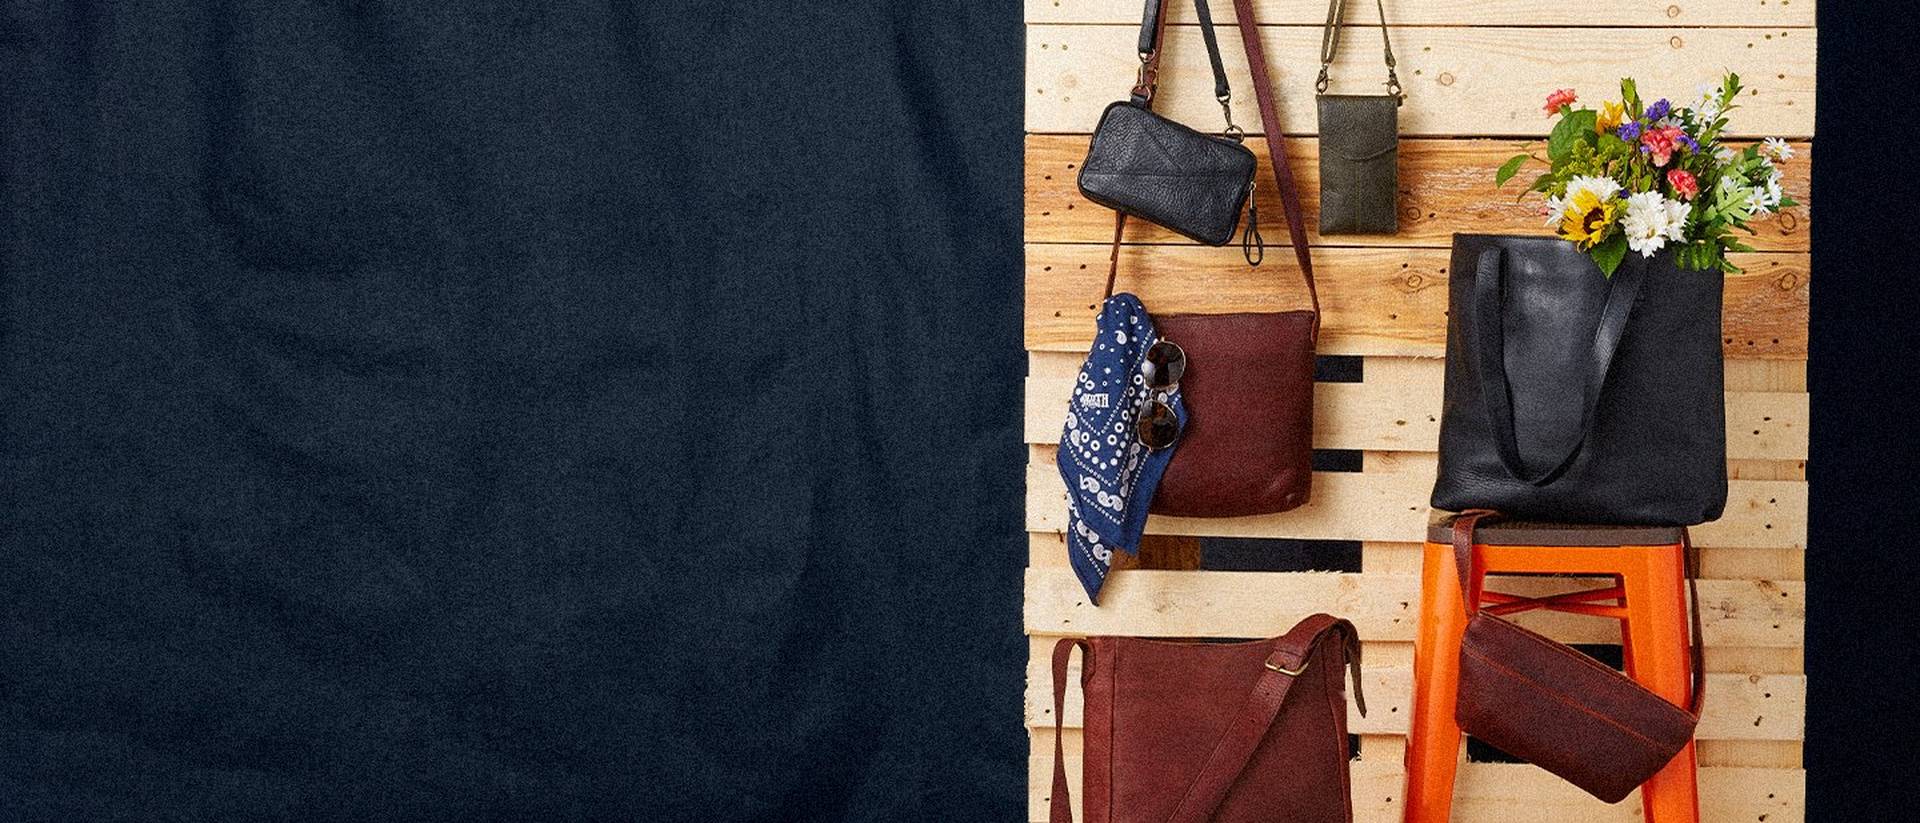 Lifetime Leather bags hanging on a wooden palette wall against a navy linen background